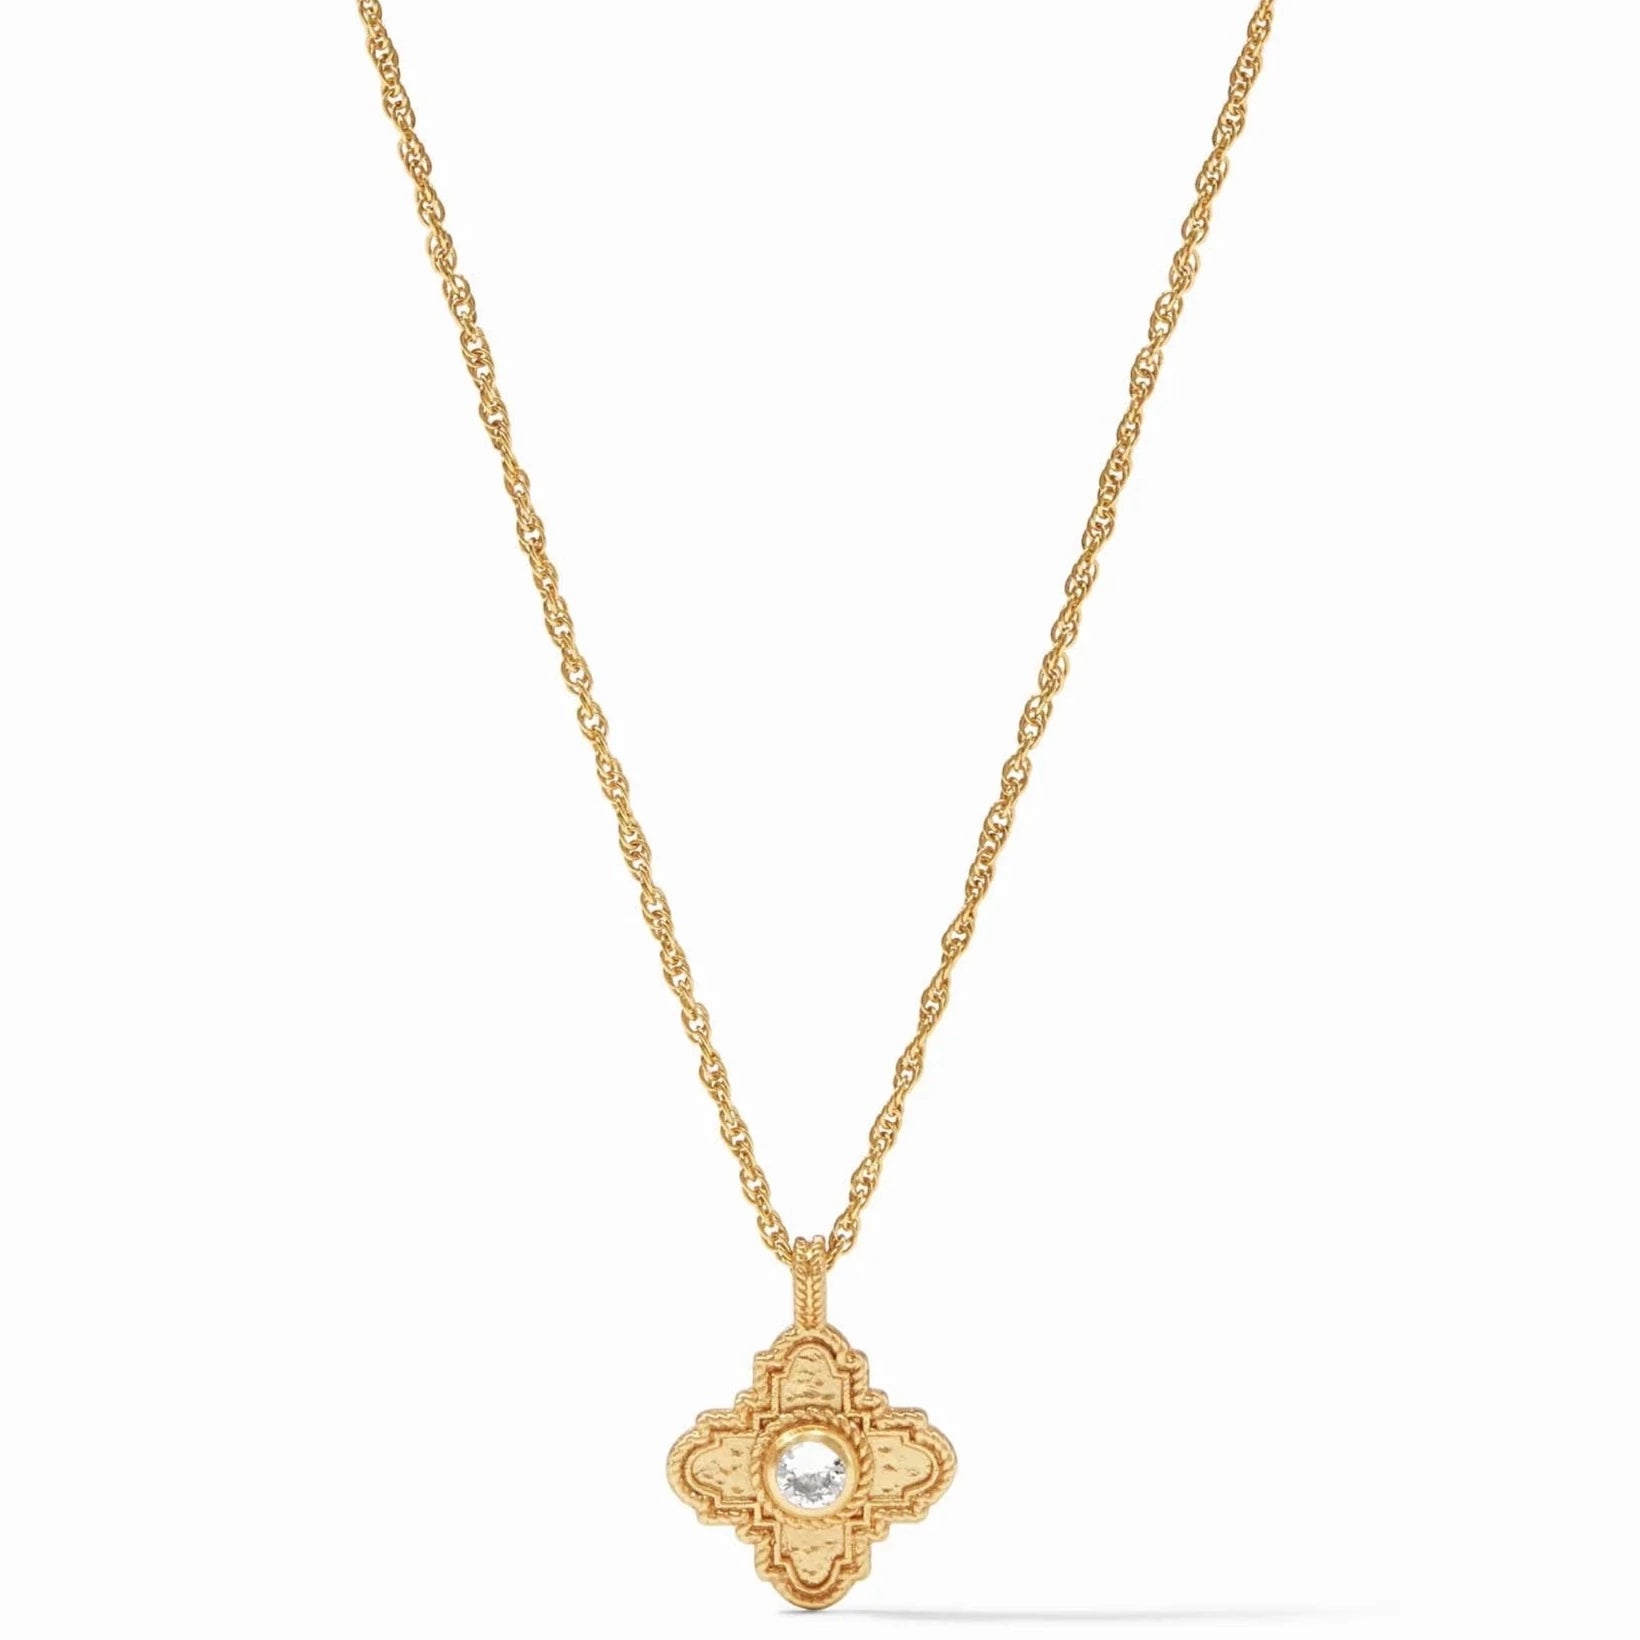 Julie Vos 24K Gold Plated Theodora Delicate Pedant with Cubic Zirconia Necklace